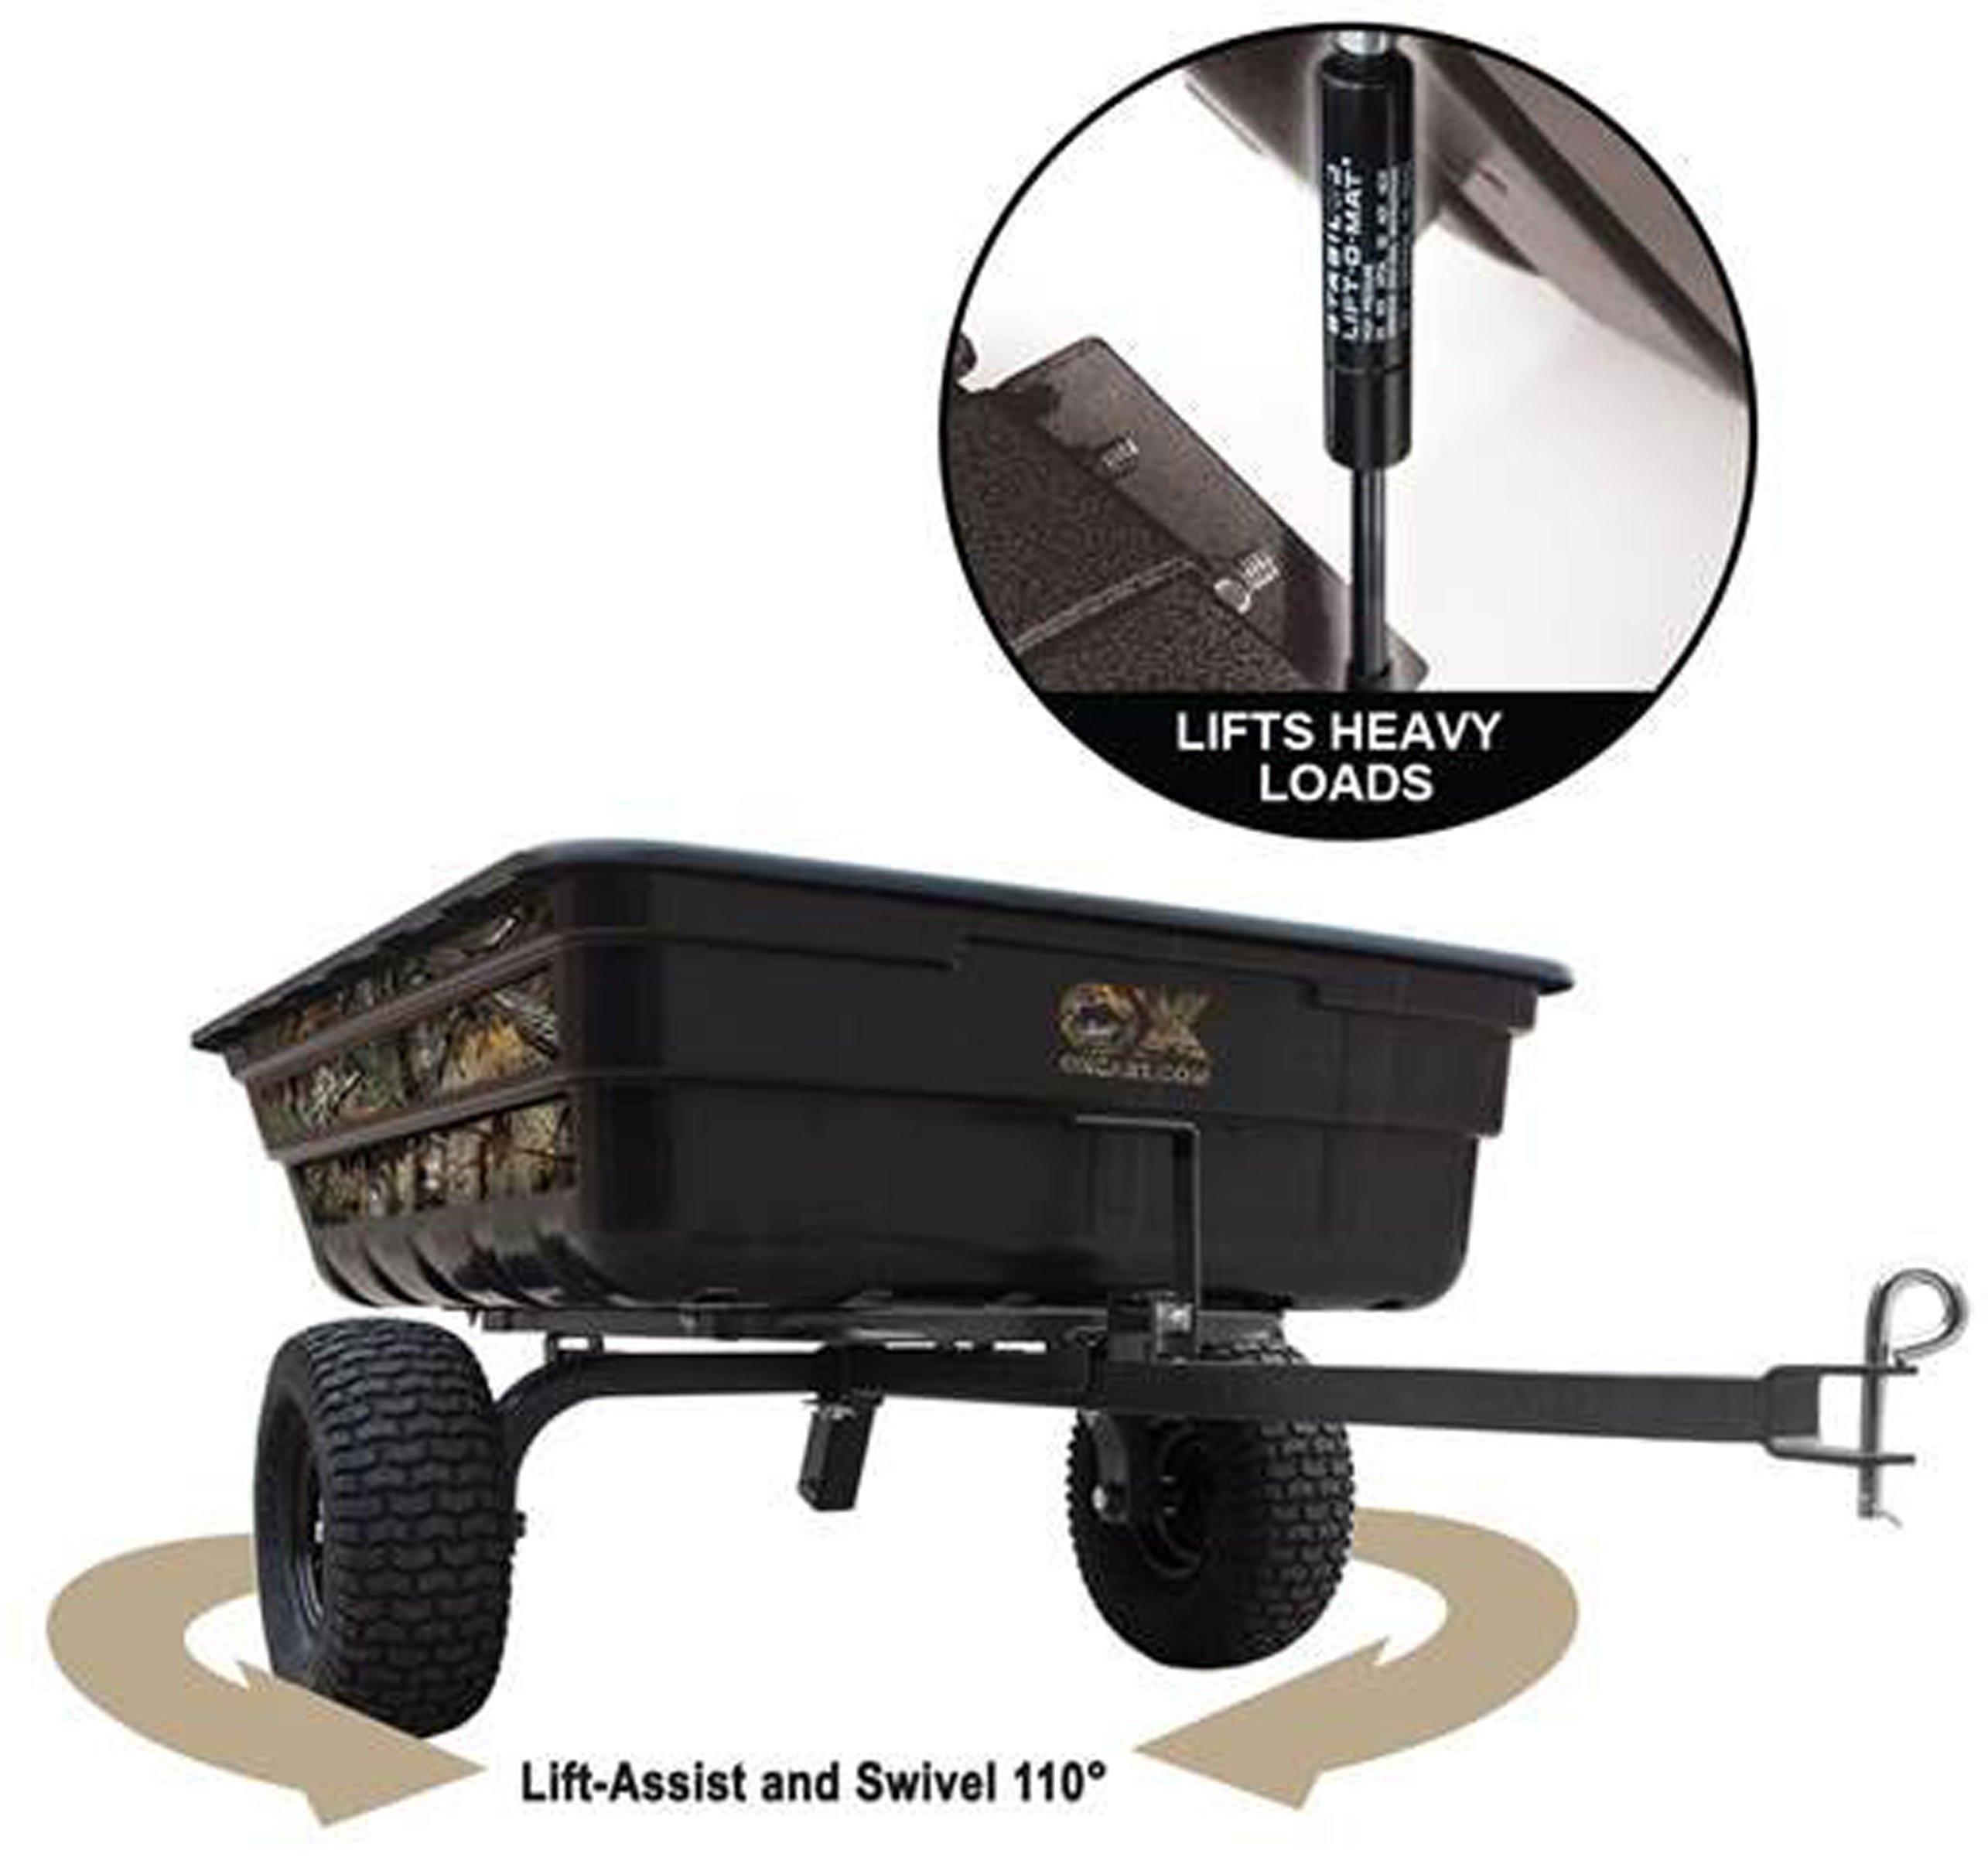 Realtree Half-Ton Lift-Assist and Swivel Hauler by OxCart